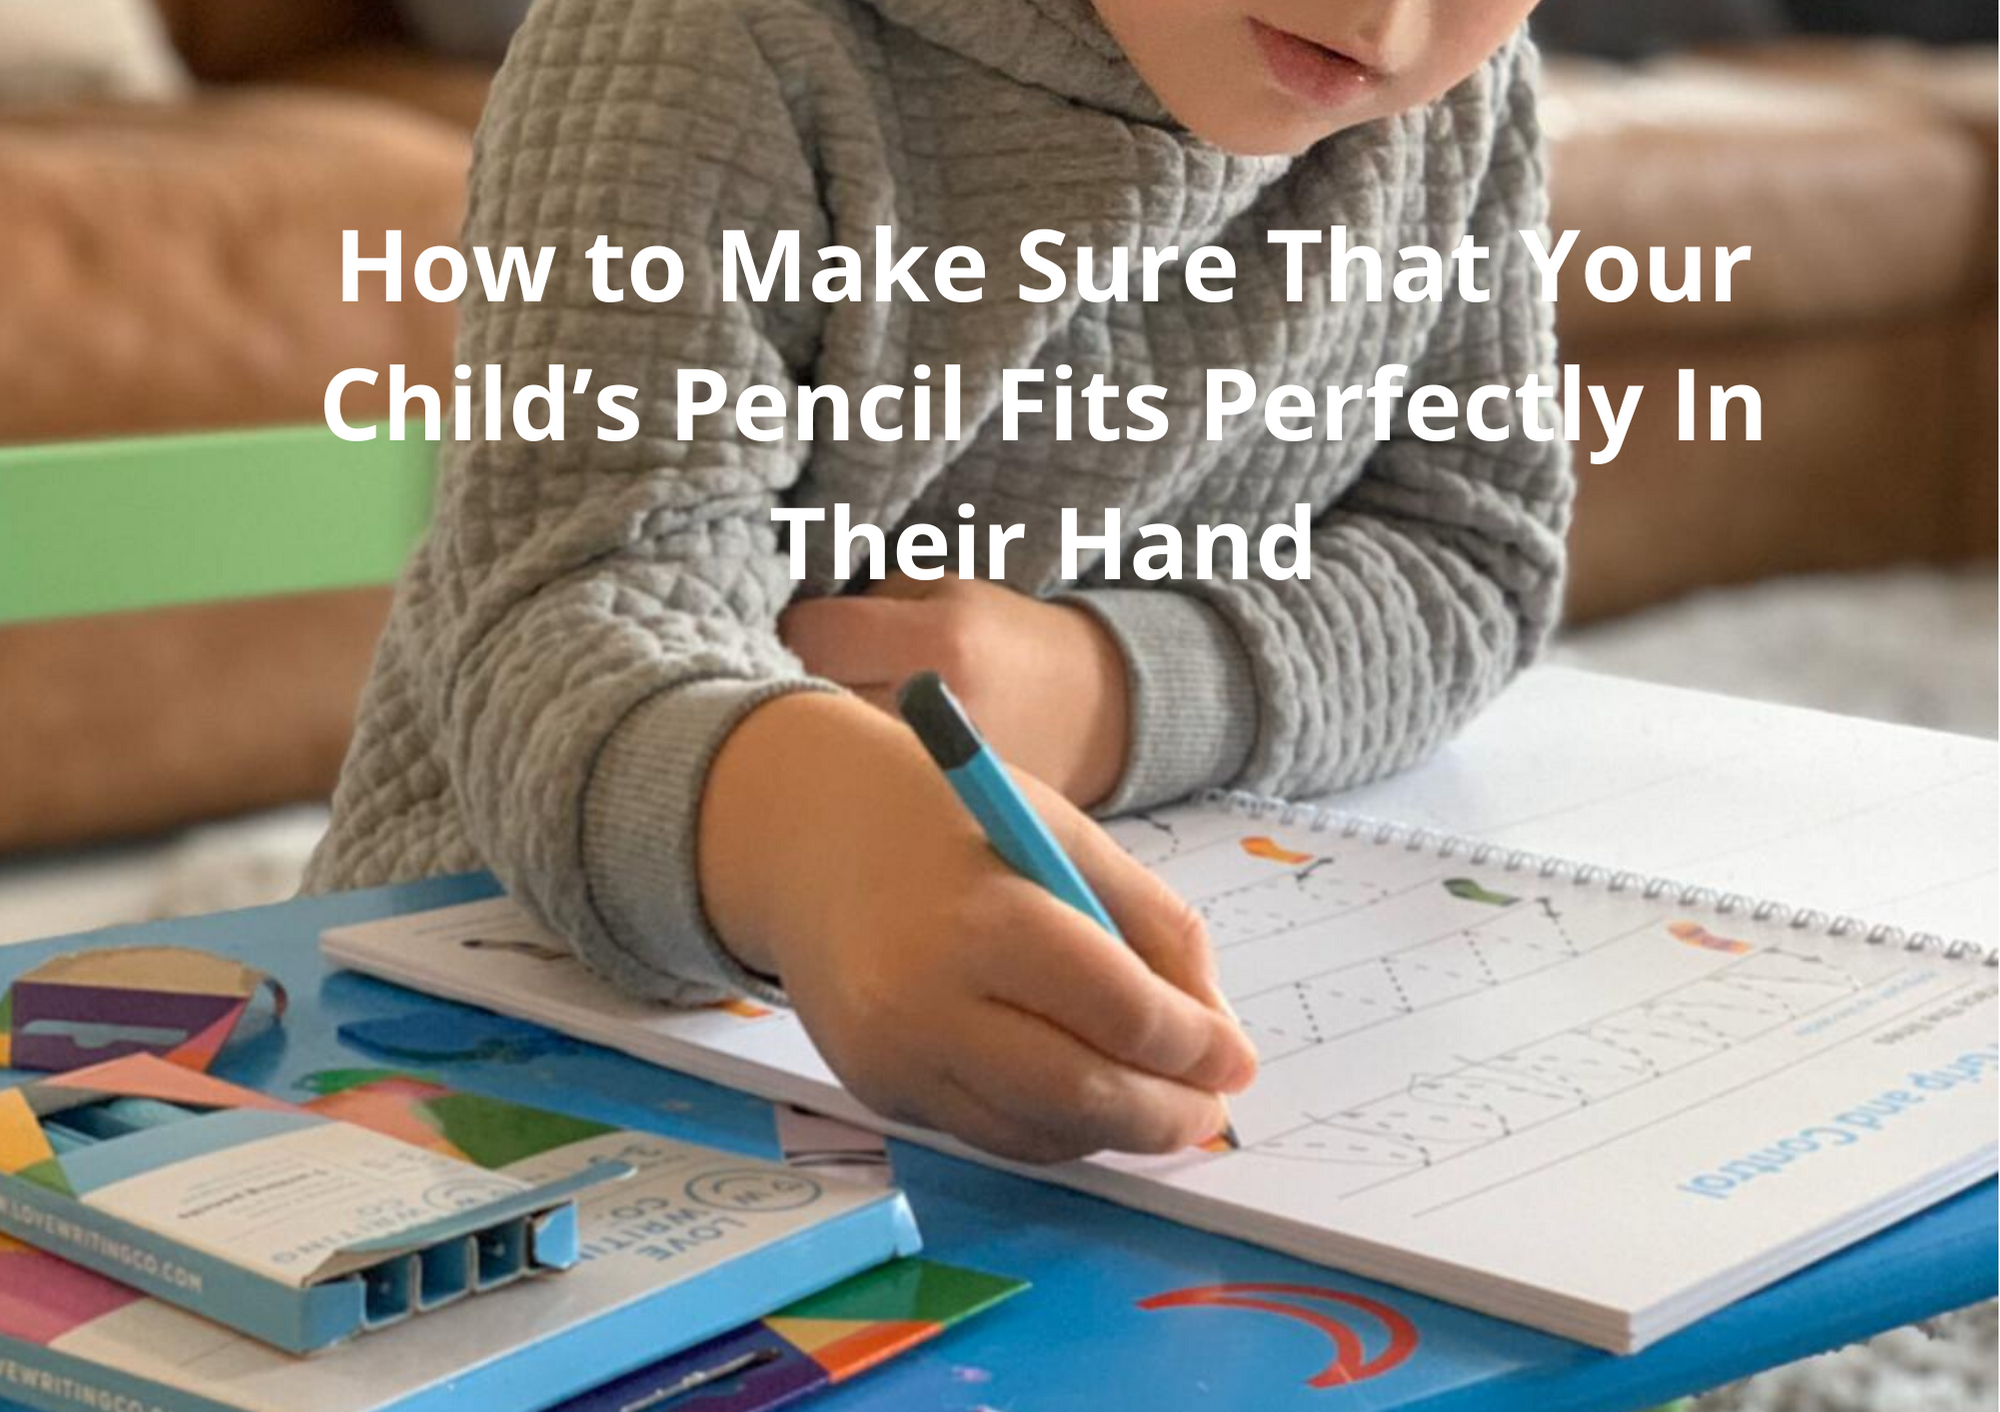 How to Make Sure That Your Child’s Pencil Fits Perfectly In Their Hand